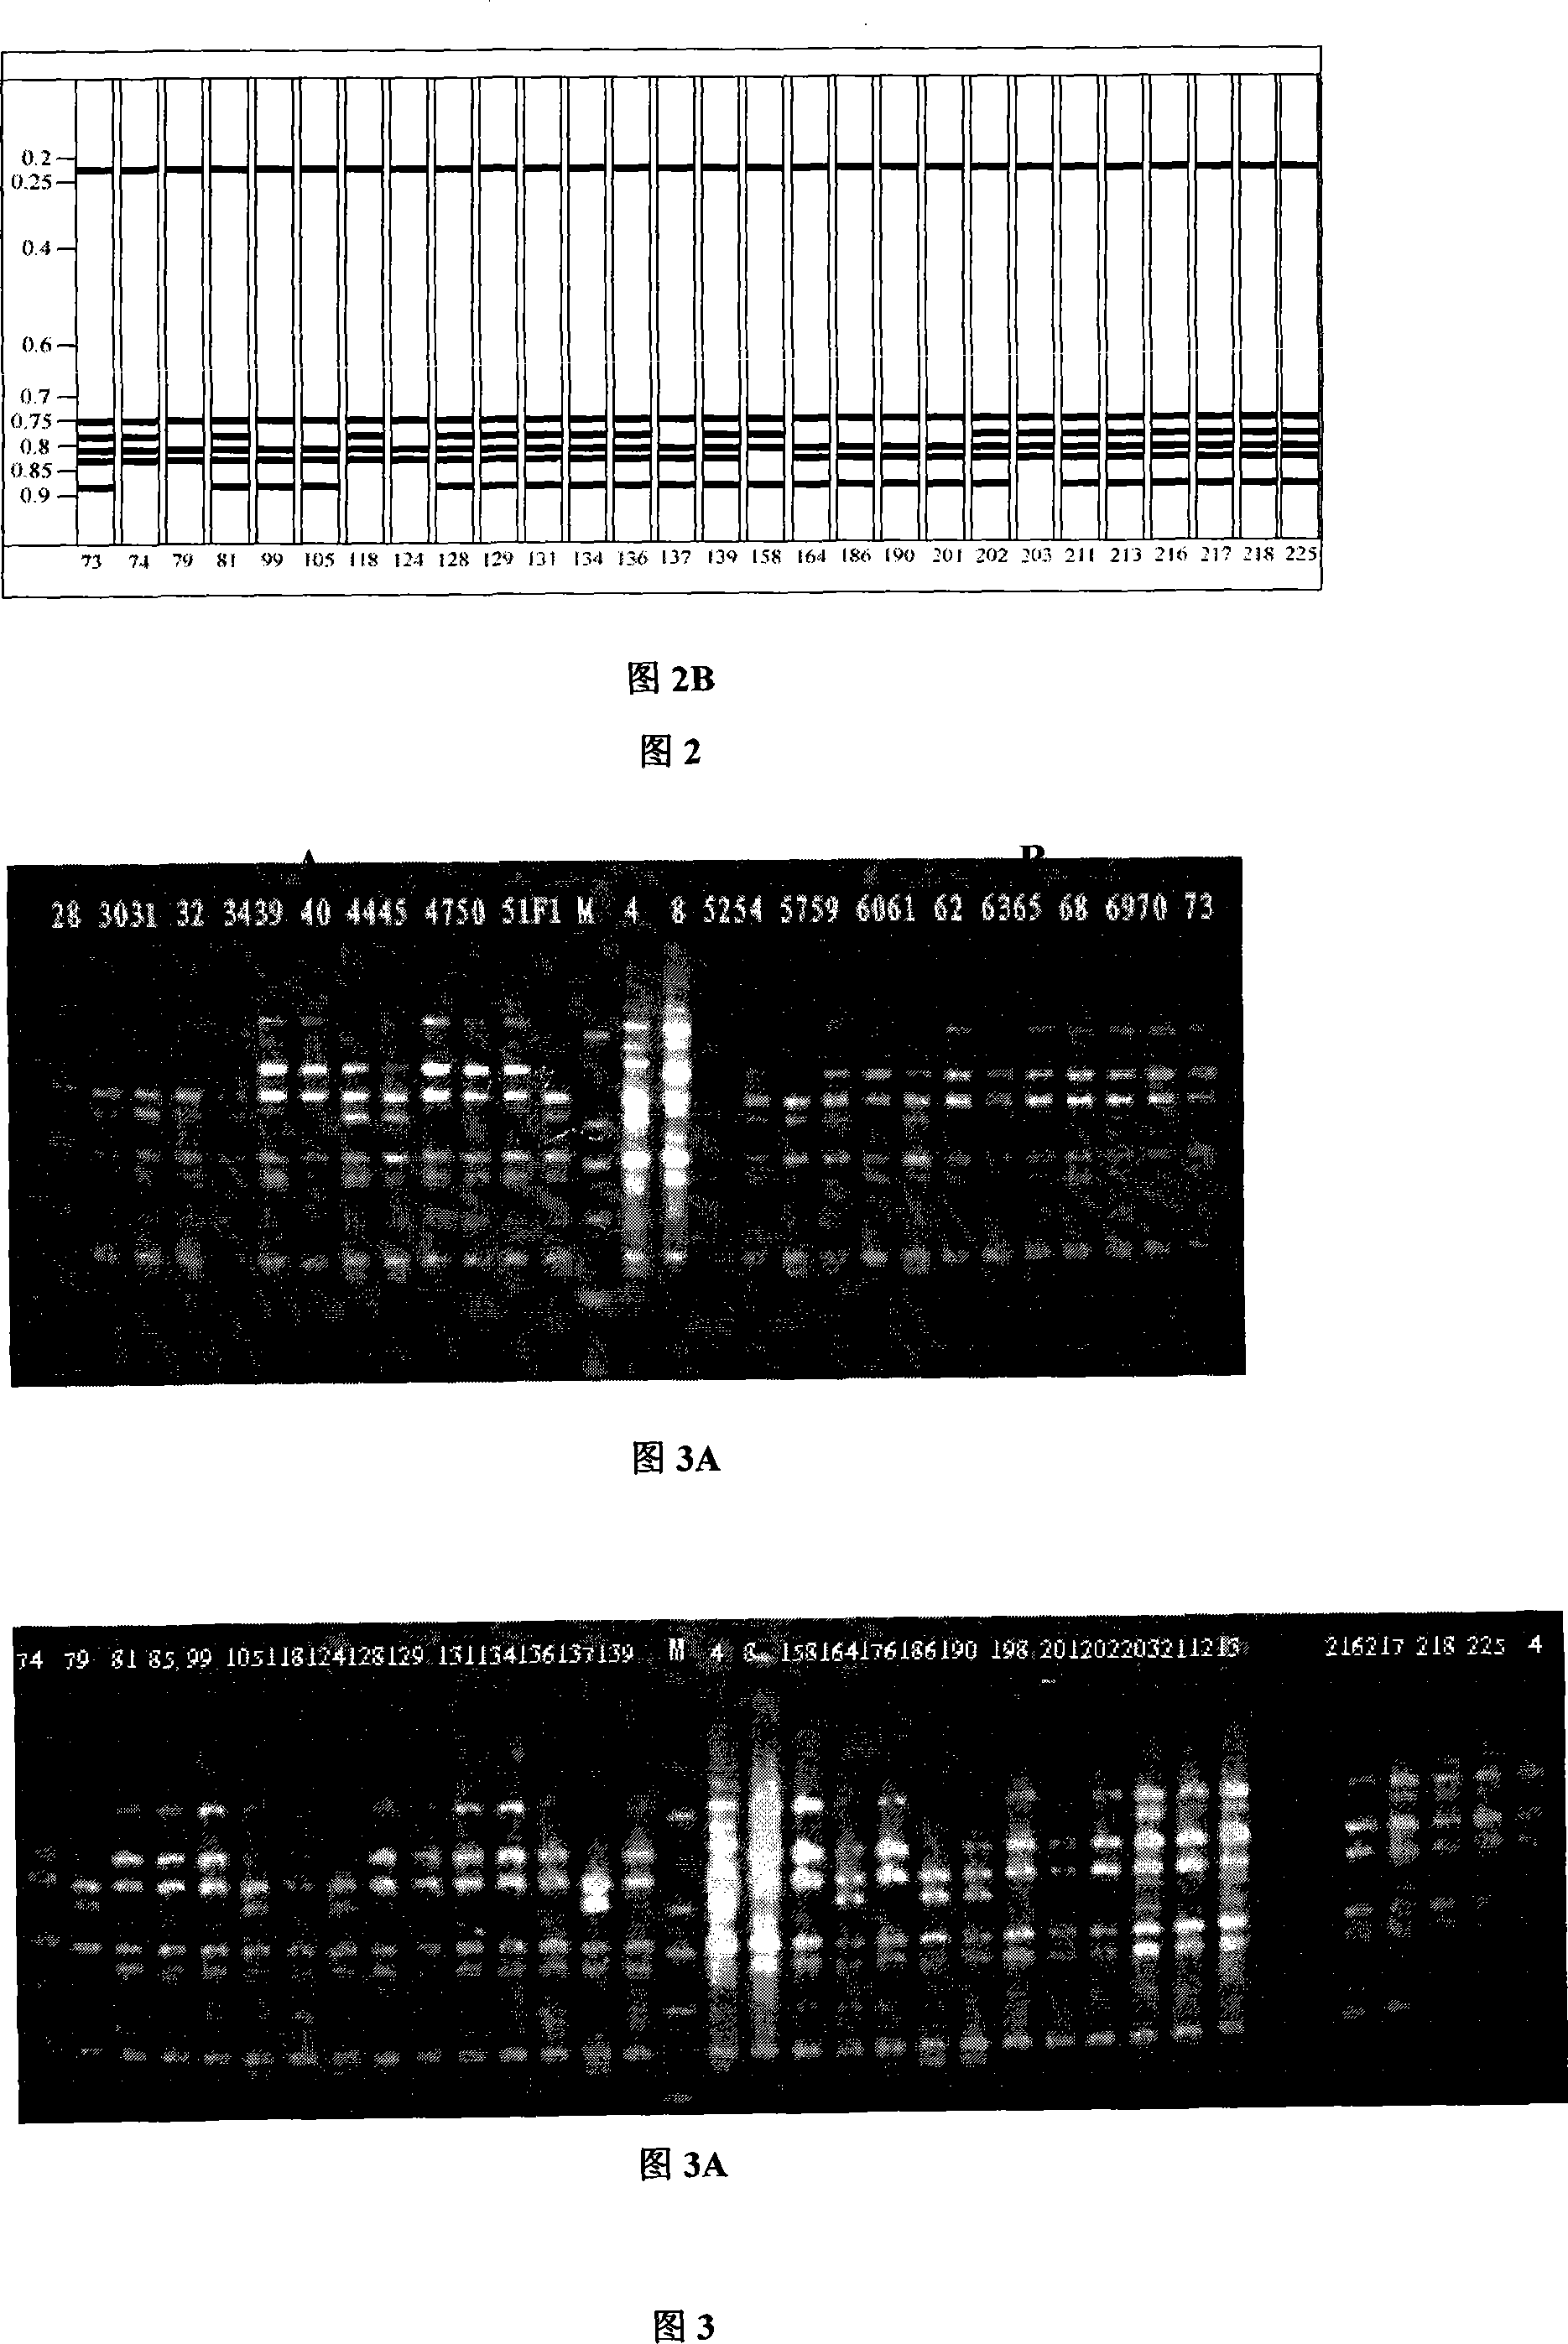 Method for producing cordycepin, breeding of high production cordyceps militaris link bacterial strain BYB-08 and application